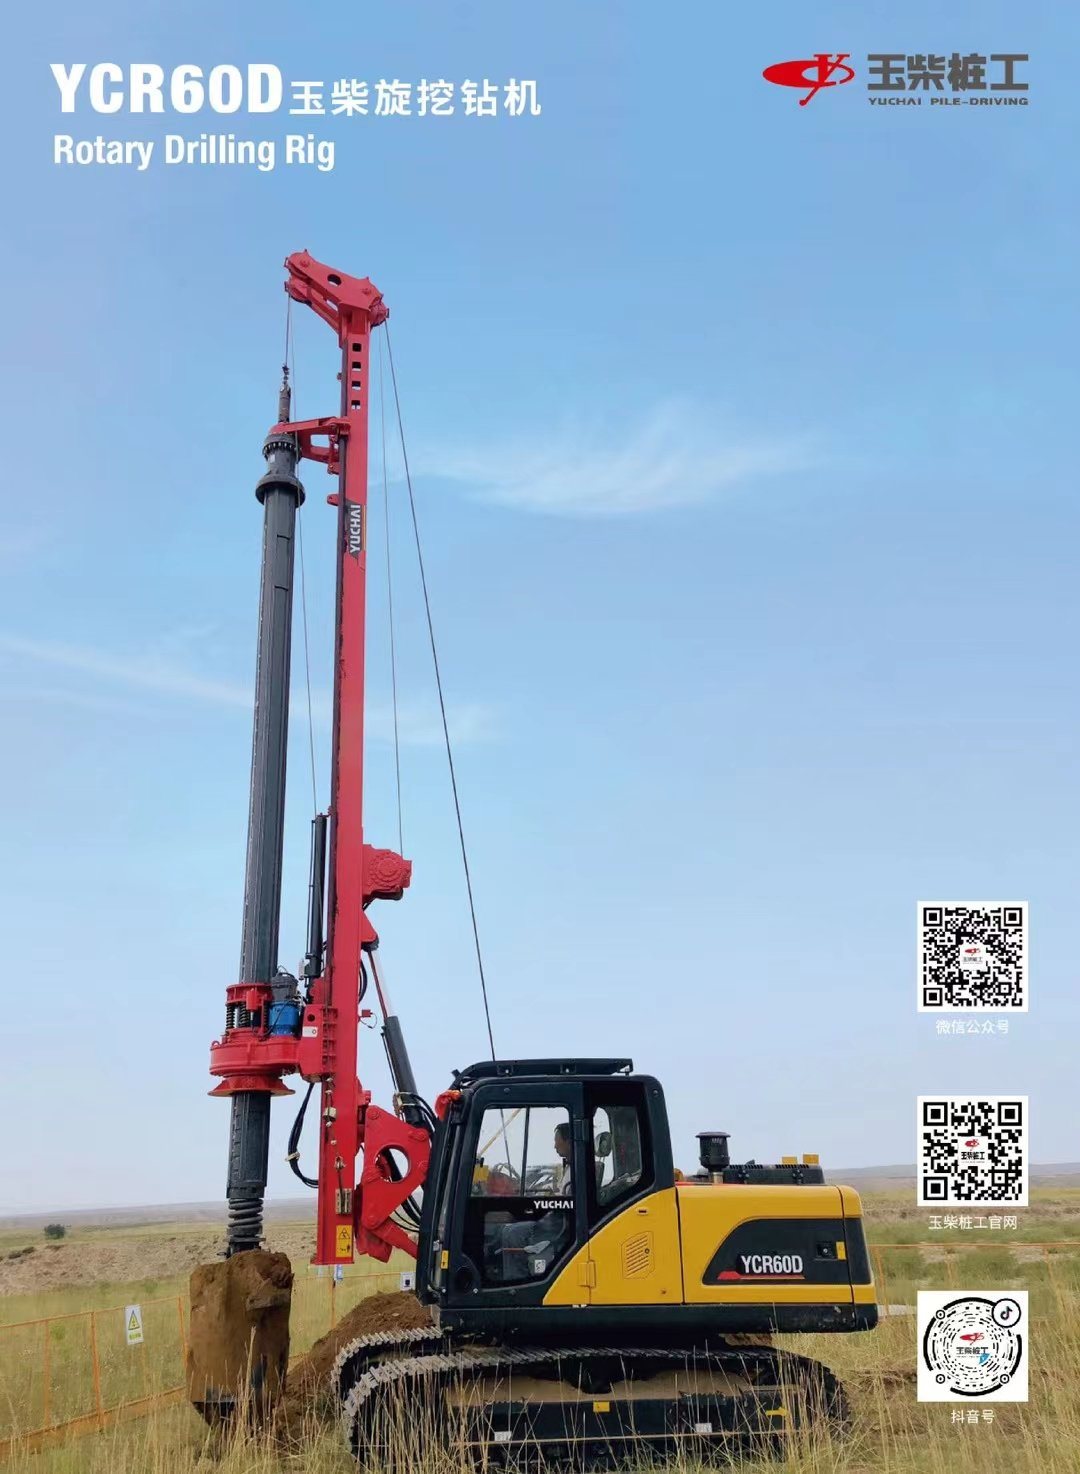 New Rotary Drilling Machine Ycr60d Rock Drill Rig with Price List